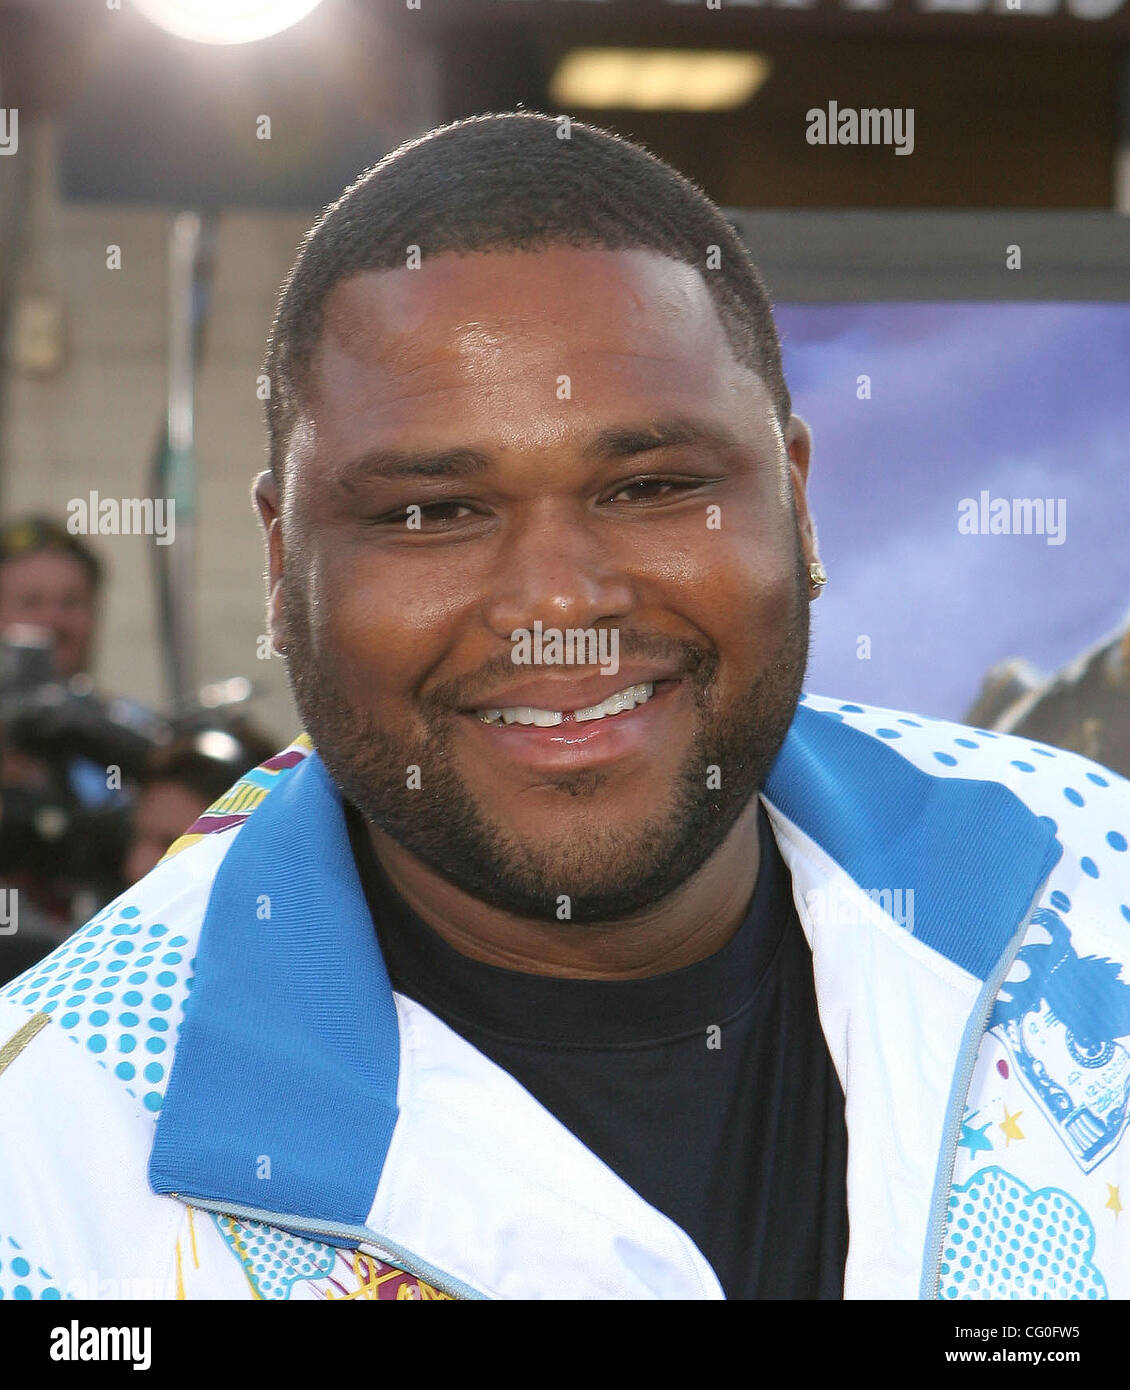 Jun 27, 2007; Hollywood, California, USA;  Actor ANTHONY ANDERSON  at the Hollywood Premiere of ' Transformers' held at Mann's Village Theater. Mandatory Credit: Photo by Paul Fenton/ZUMA Press. (©) Copyright 2007 by Paul Fenton Stock Photo